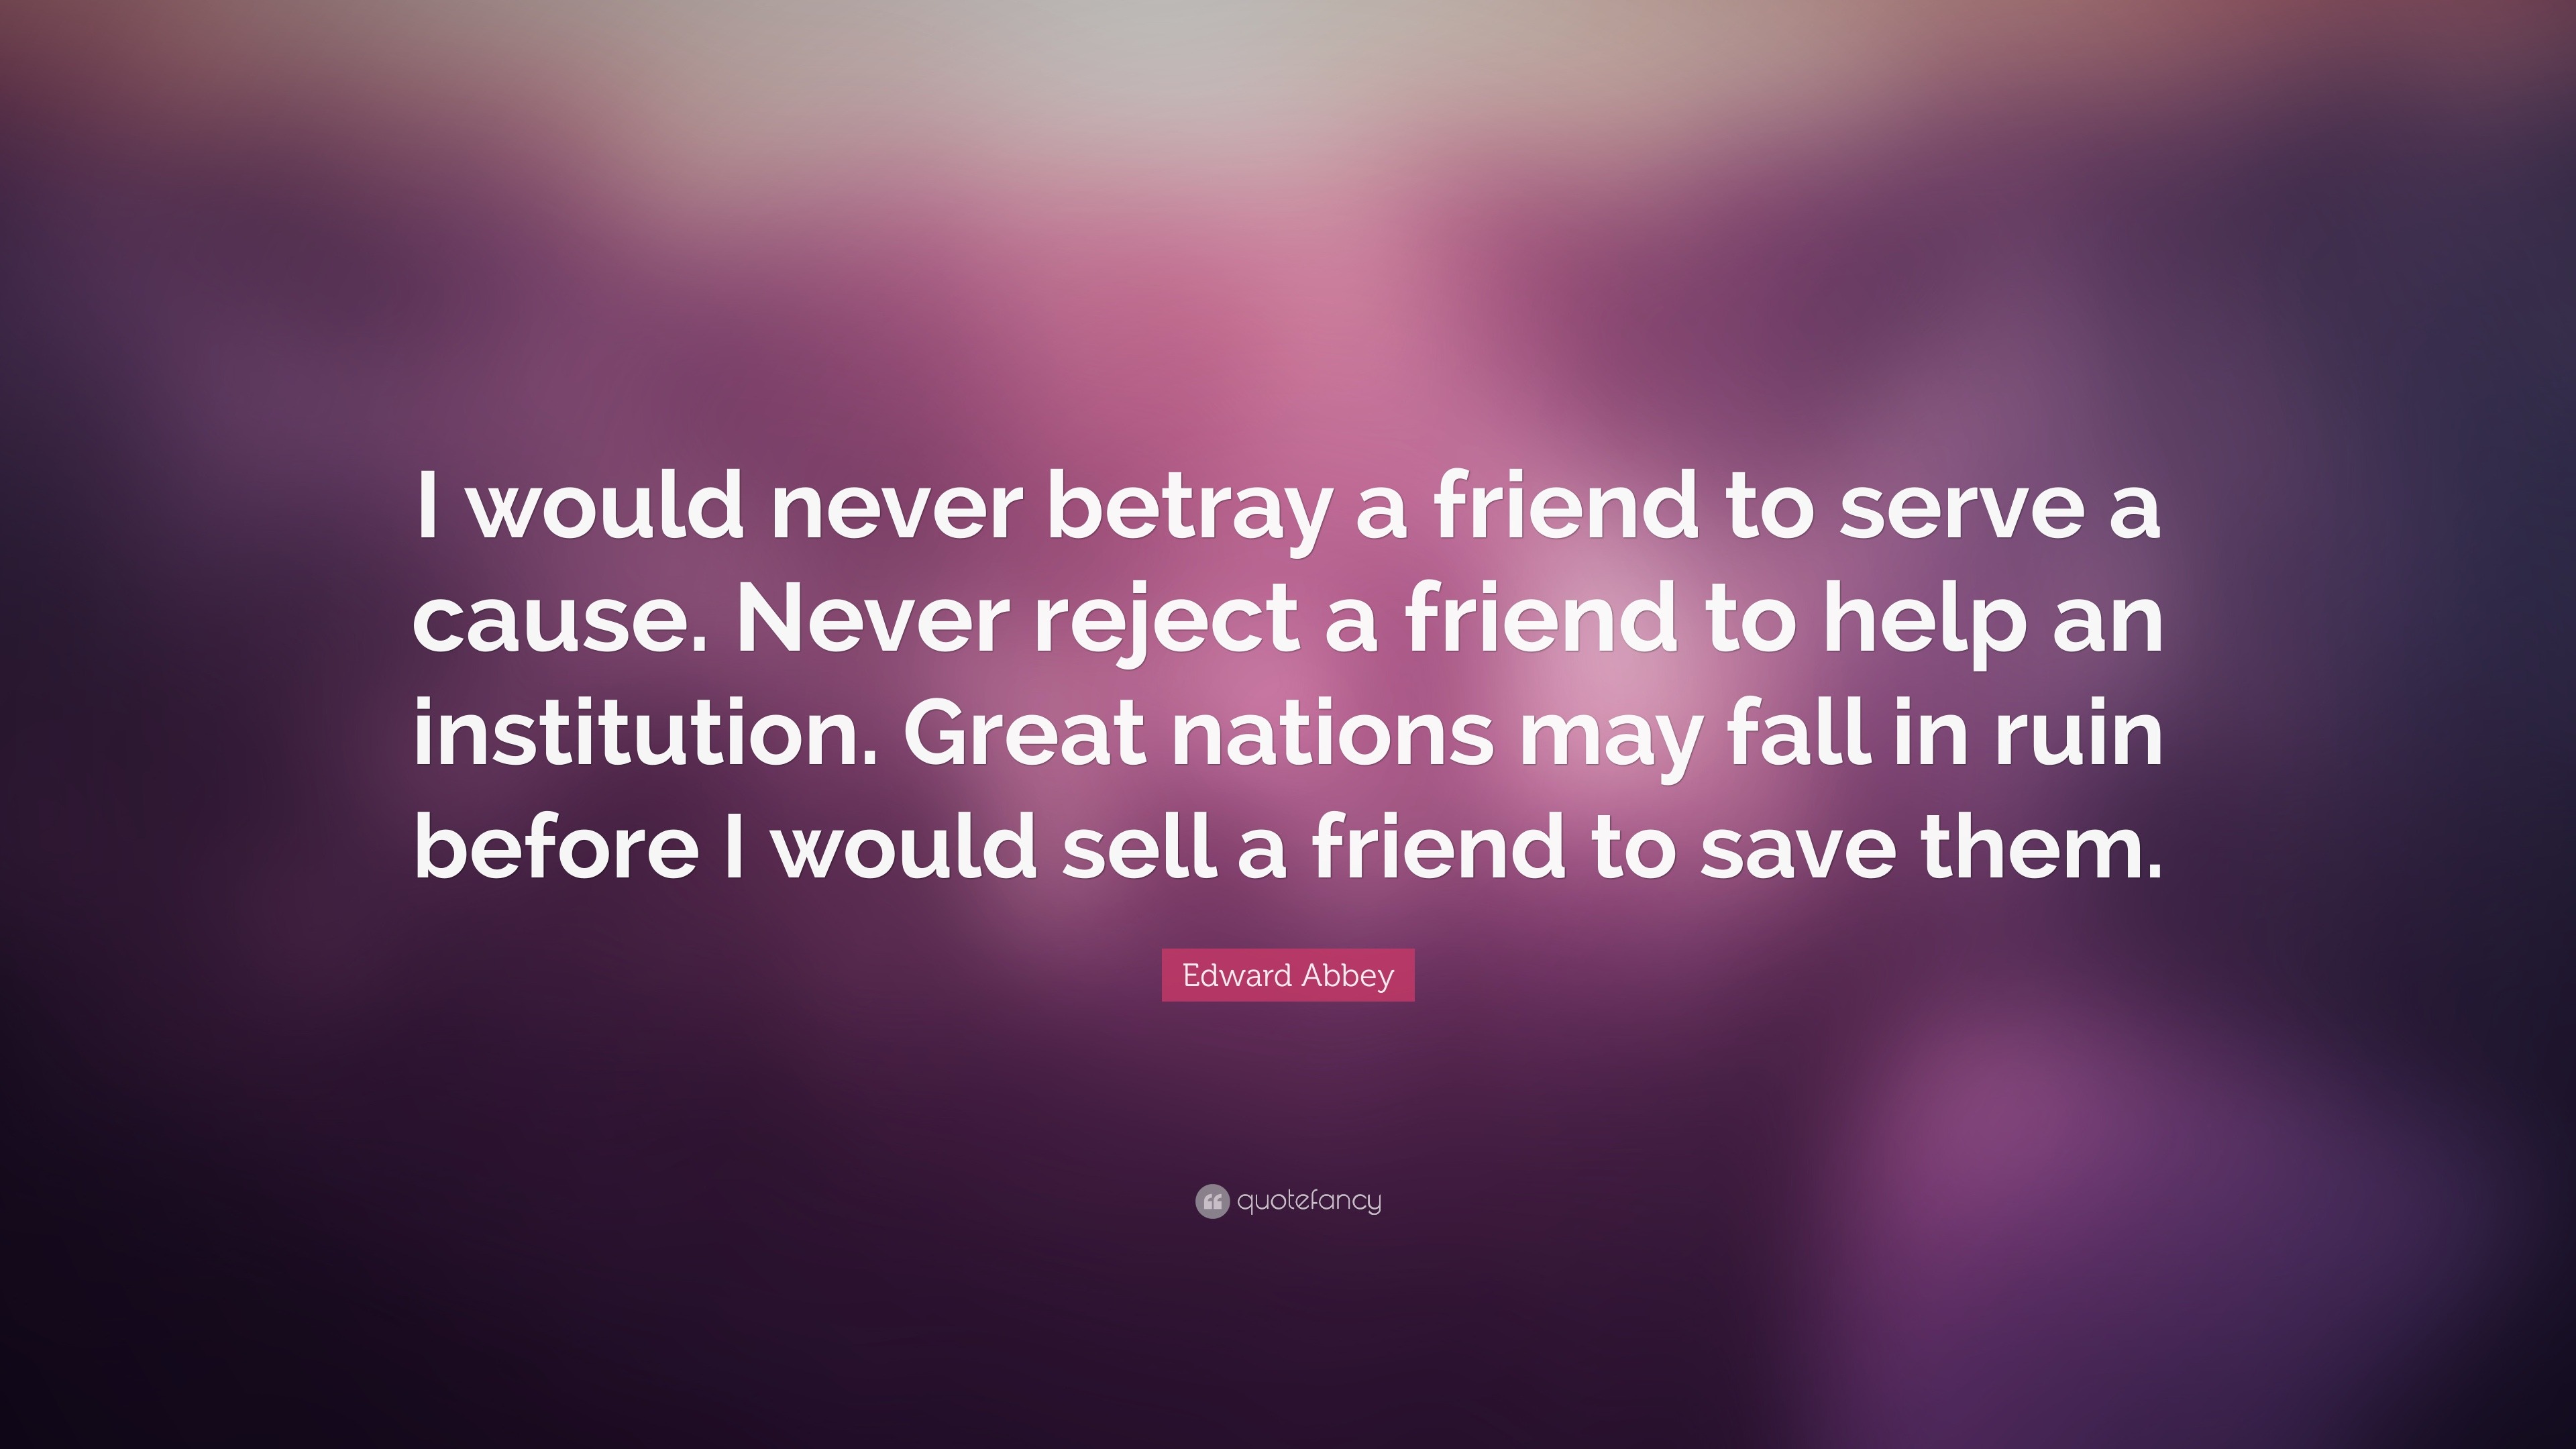 Betrayal Quotes “I would never betray a friend to serve a cause Never